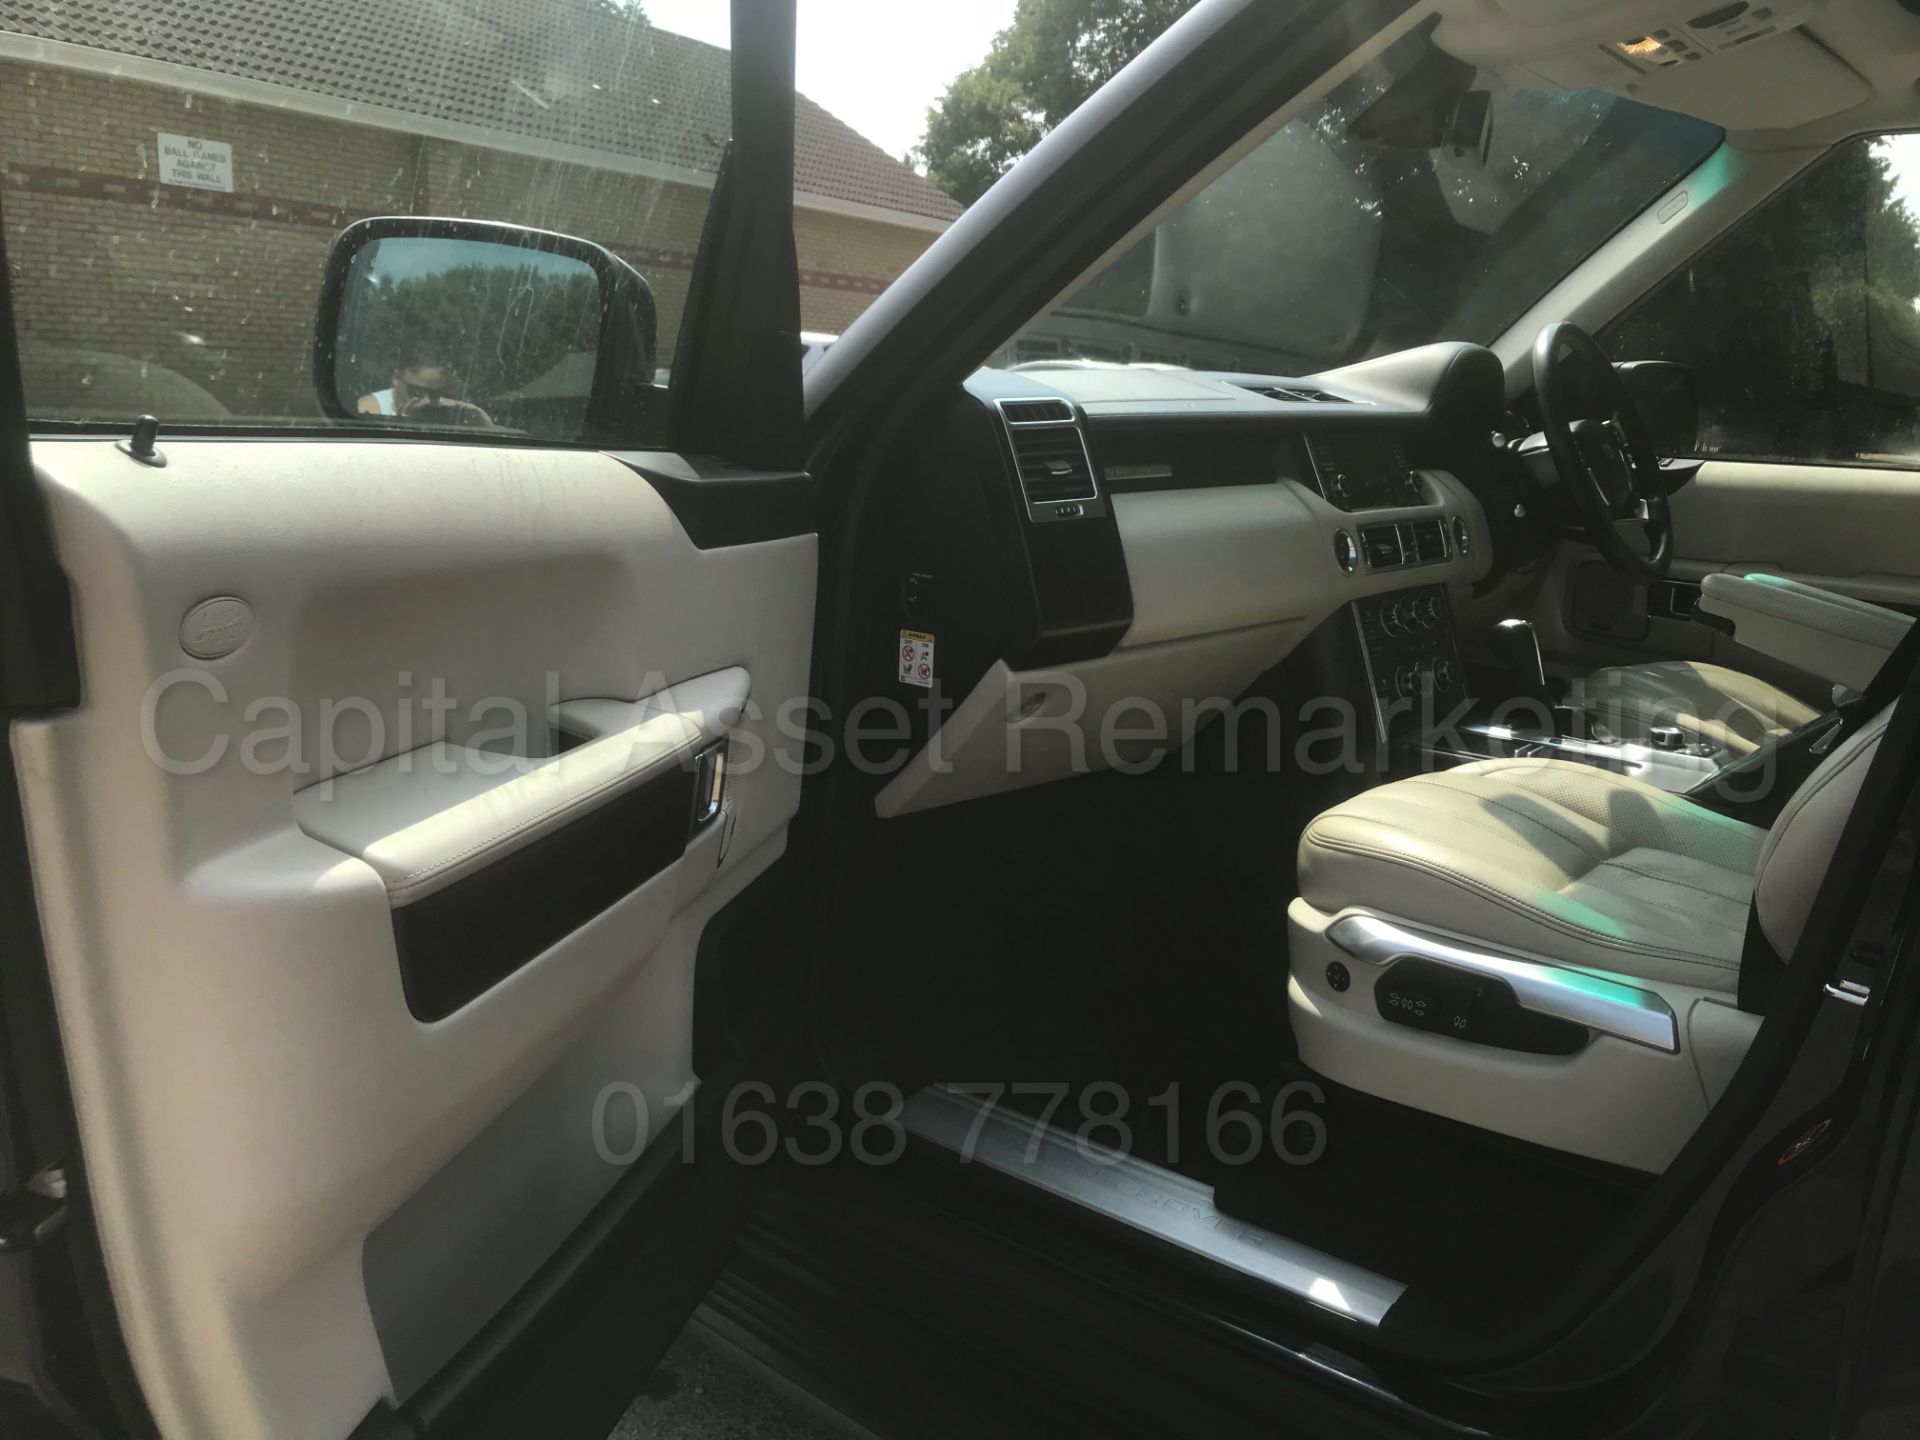 RANGE ROVER VOGUE **SE EDITION** (2010 - FACELIFT EDITION) 'TDV8 - 268 BHP - AUTO' **FULLY LOADED** - Image 23 of 62